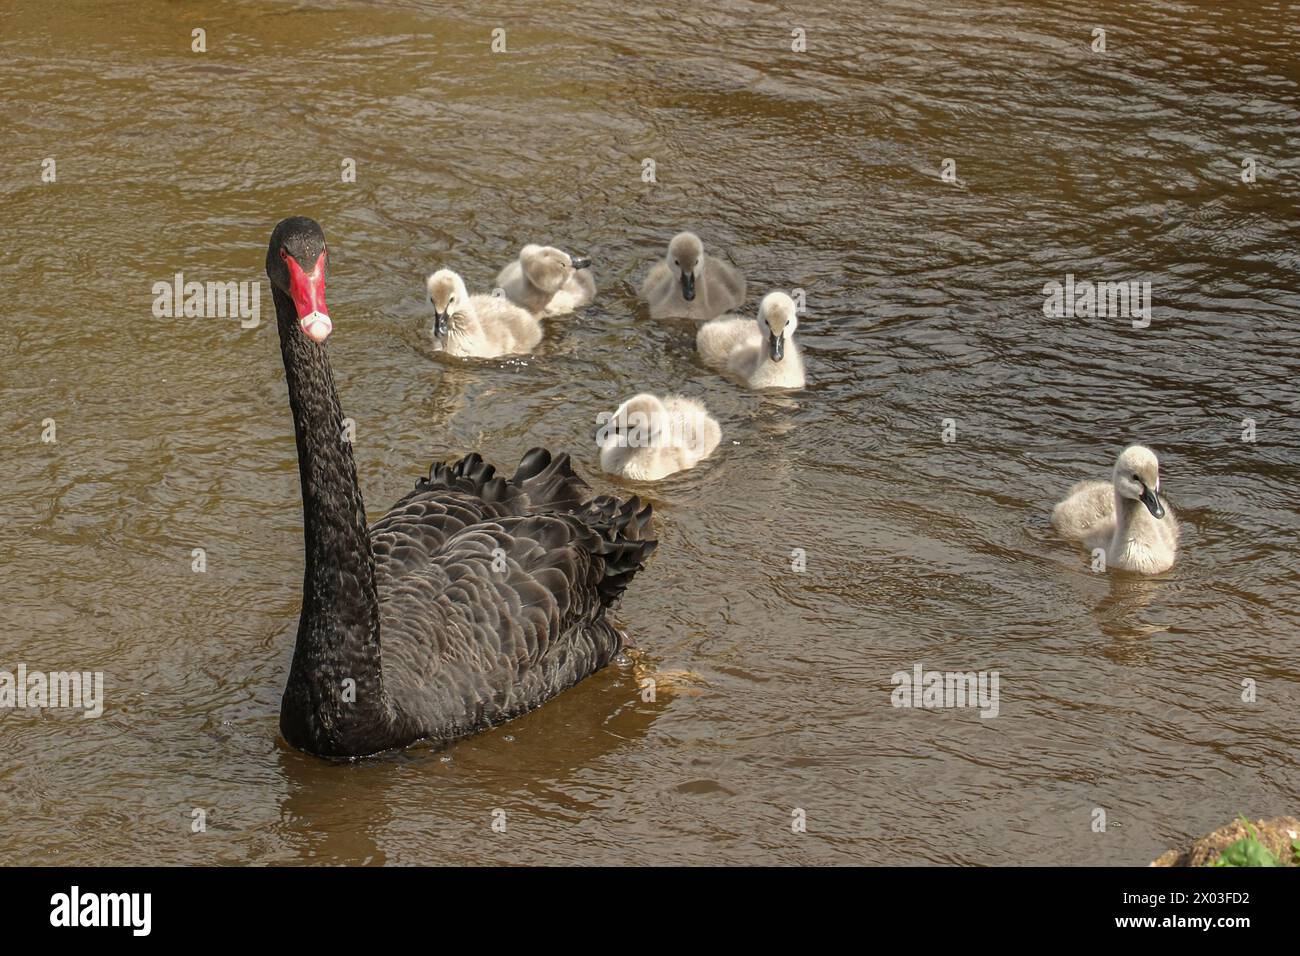 Dawlish, Devon, UK. 9th April 2024. UK Weather, Despite the endless rain and storms in the south west a pair of the famous Black Swans of Dawlish have still managed to raise a family of 6 goslings which have now taken to the water. Credit Simon Maycock / Alamy Live News. Stock Photo